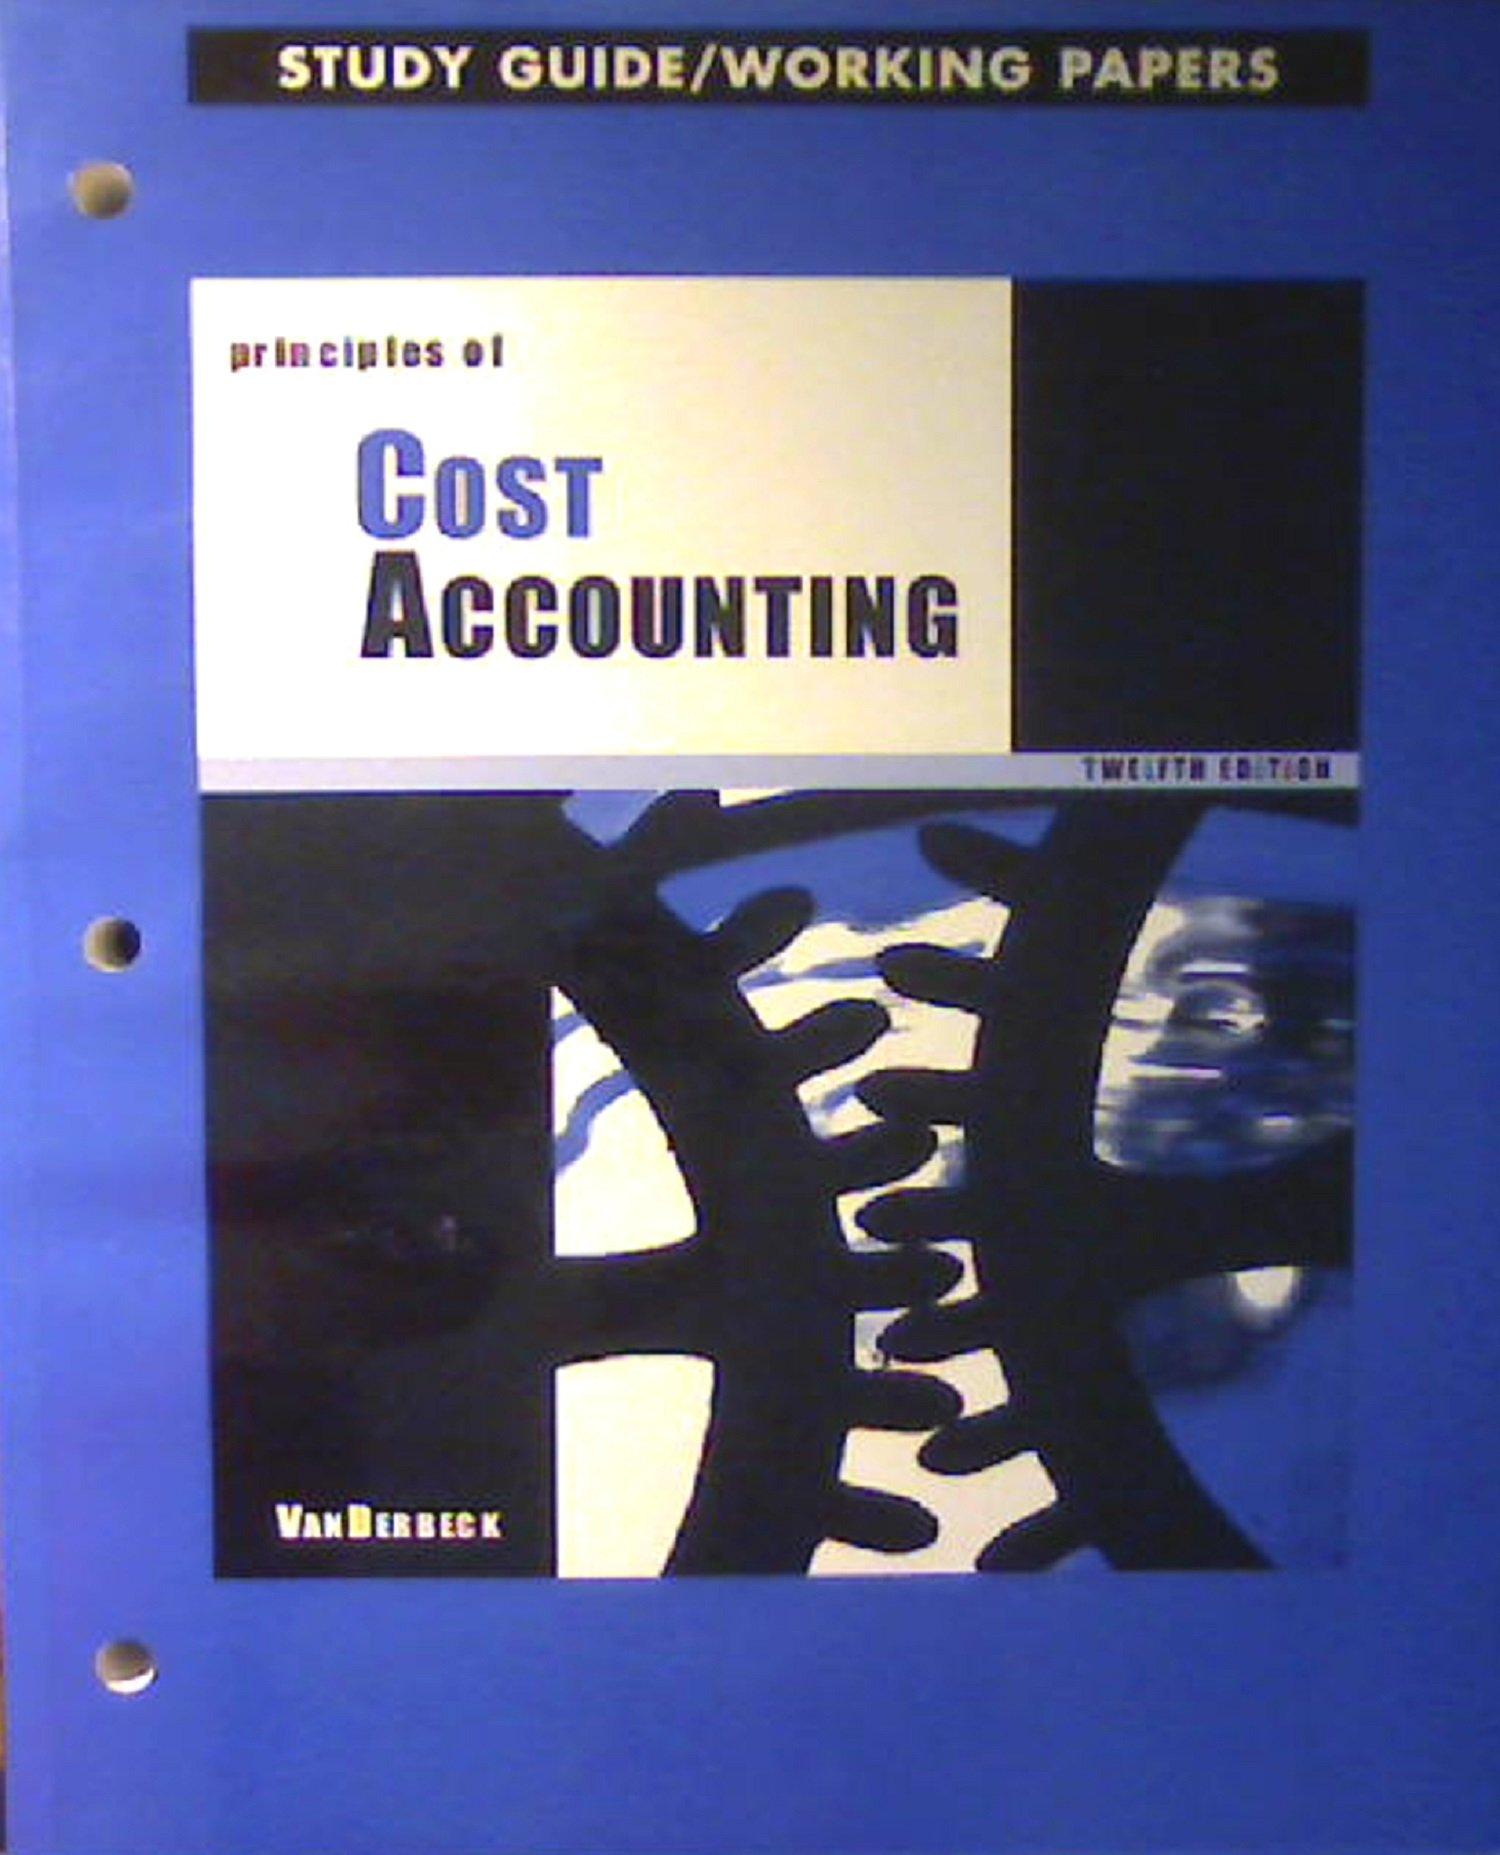 Principles Of Cost Accounting Study Guide And Working Papers